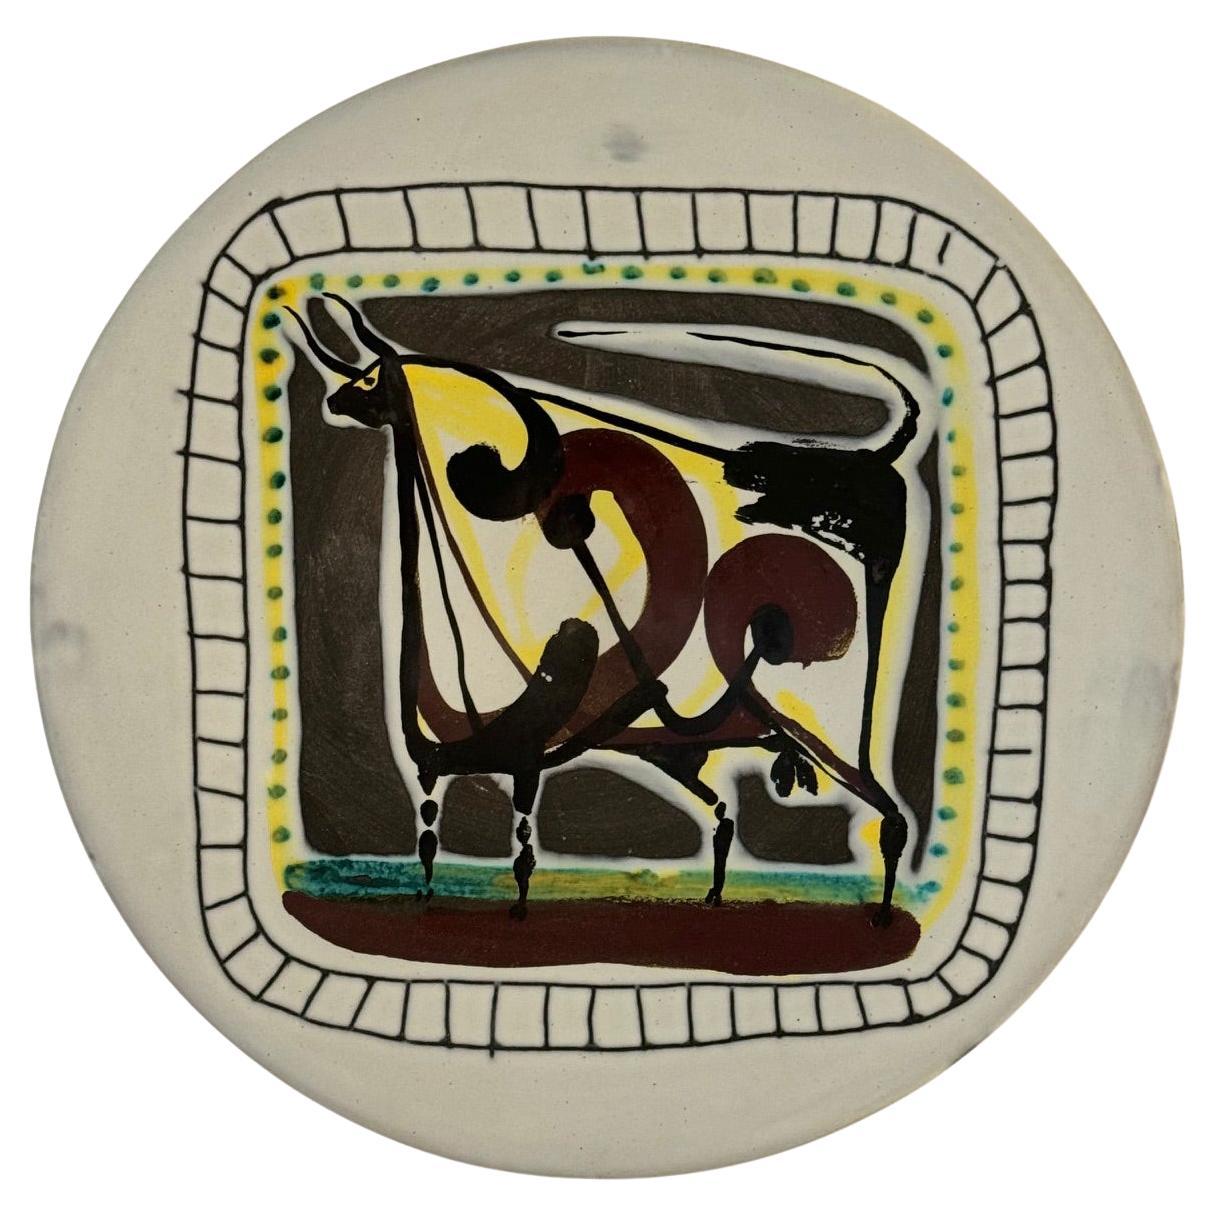 Ceramic Dish "Bull" Signed by Roger Capron, Vallauris 1955 For Sale